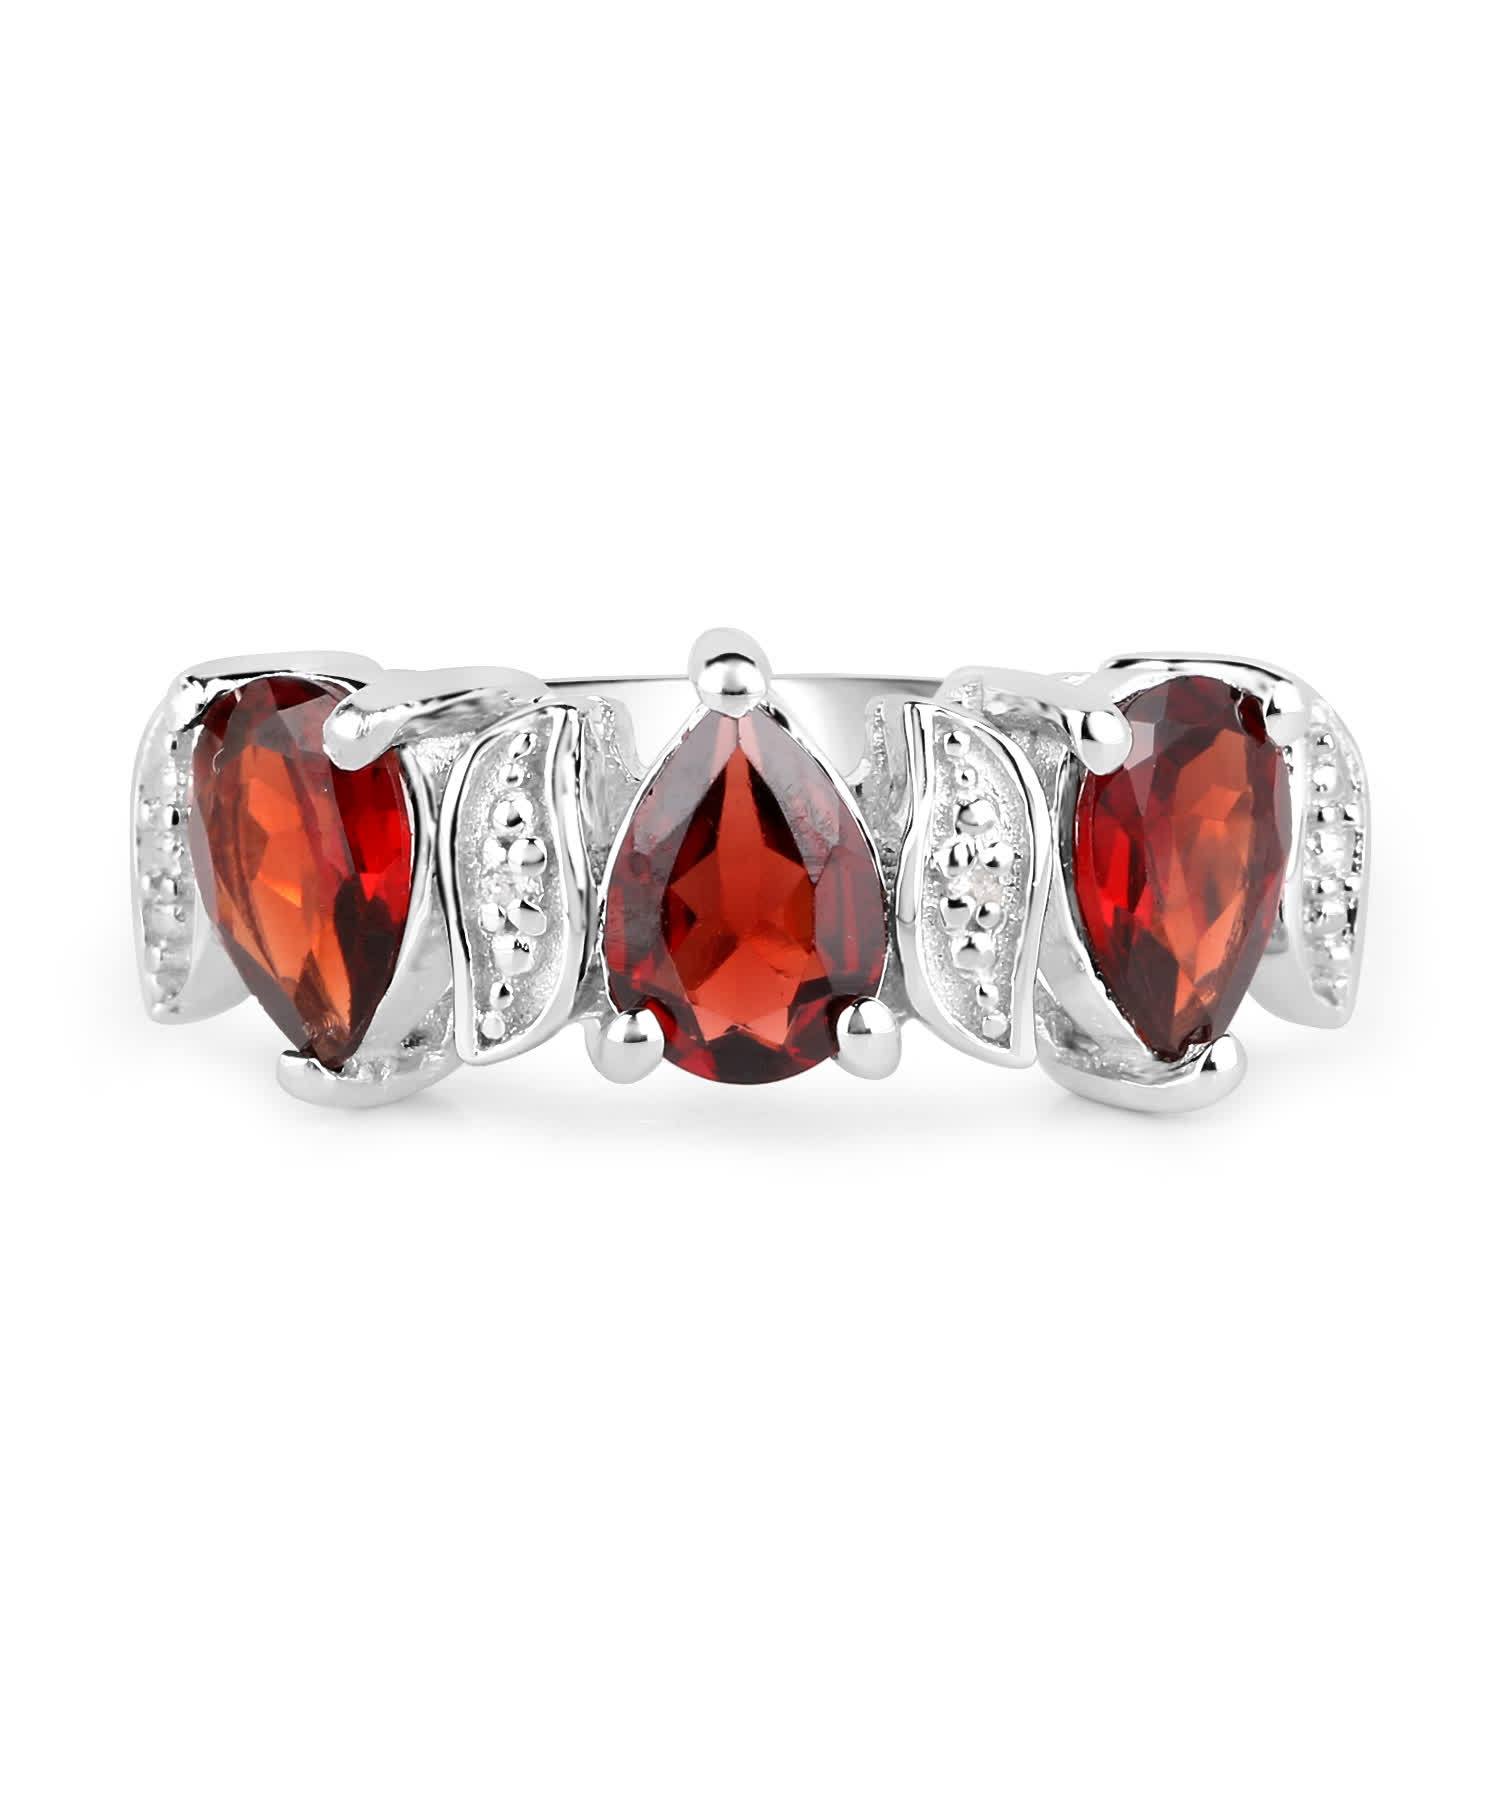 2.56ctw Natural Garnet and Topaz Rhodium Plated 925 Sterling Silver Right Hand Ring View 3